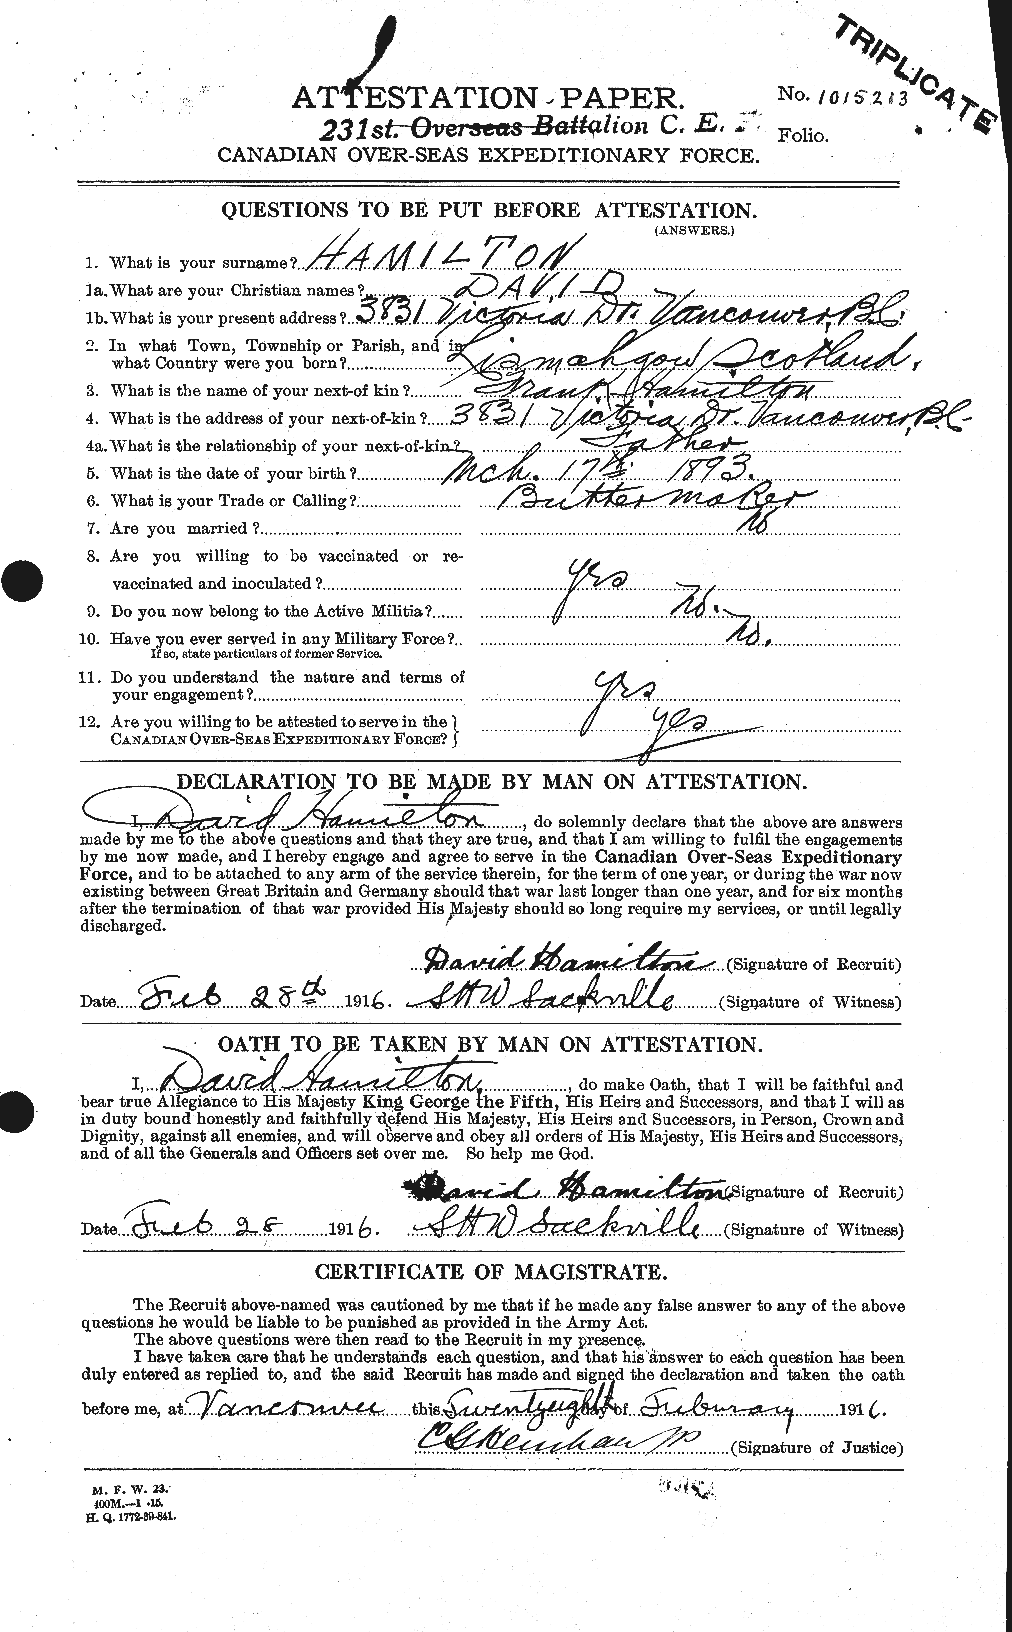 Personnel Records of the First World War - CEF 375338a